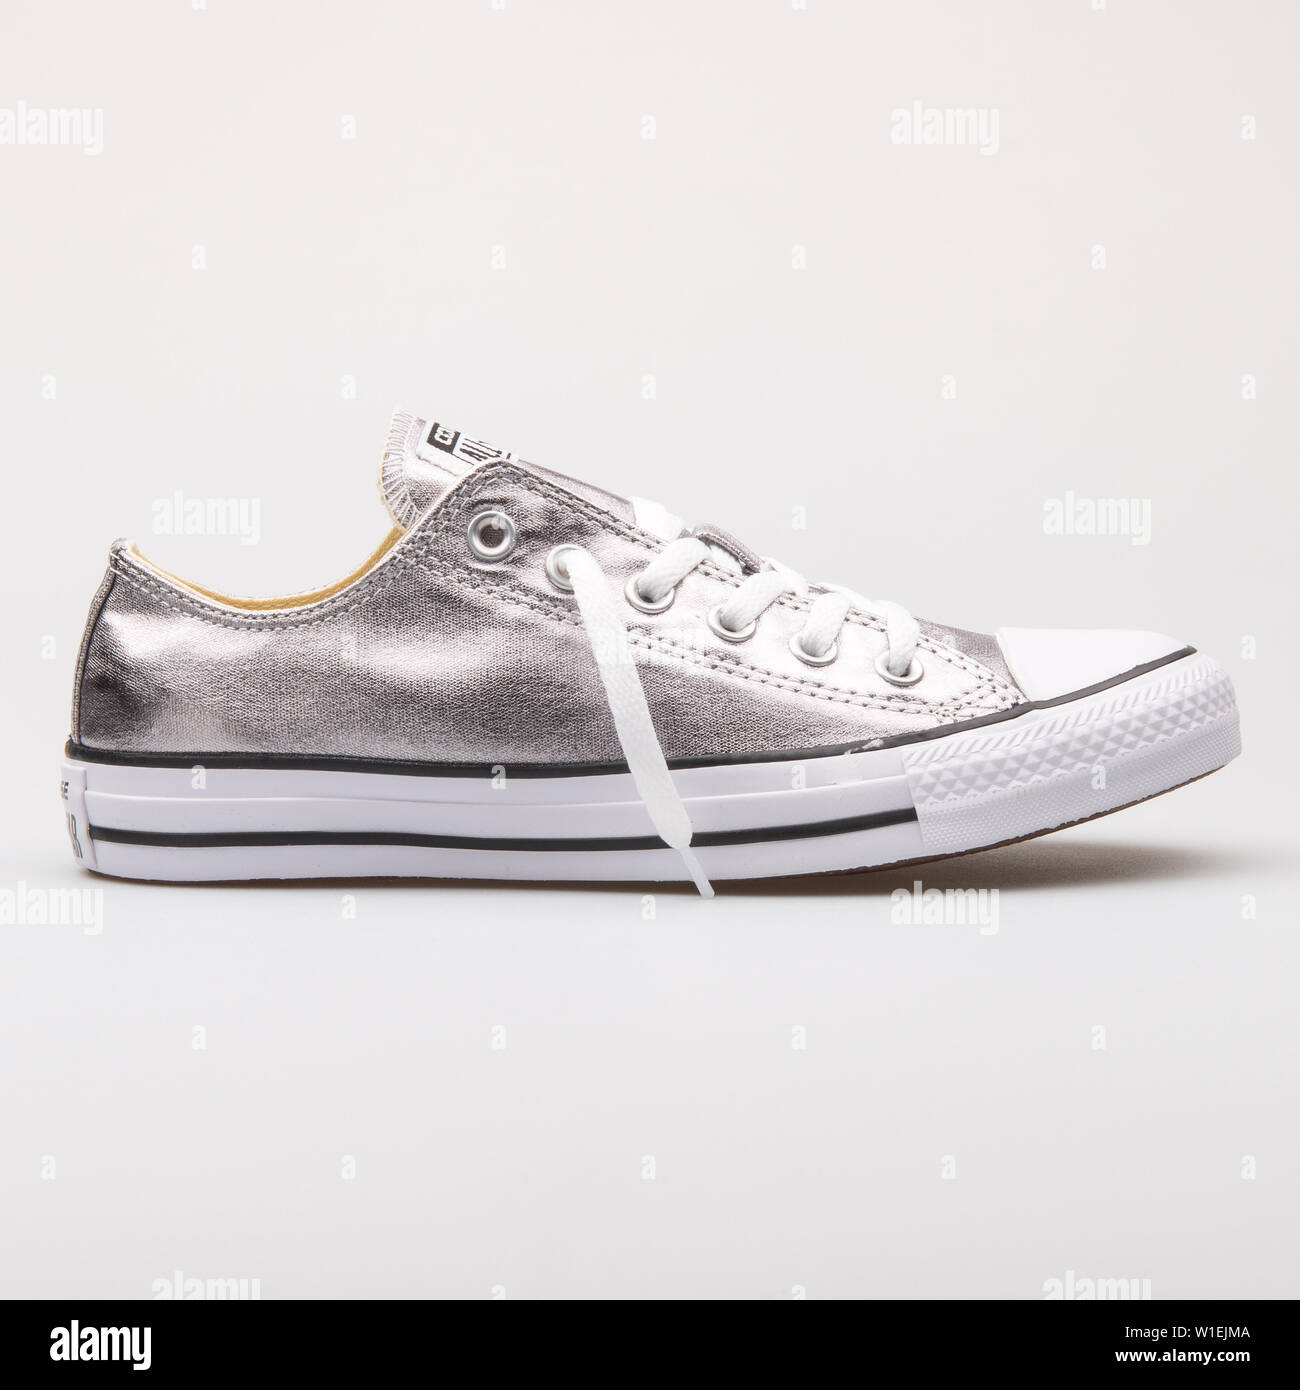 VIENNA, AUSTRIA - AUGUST 23, 2017: Converse Chuck Taylor All Star OX  gunmetal and white sneaker on white background Stock Photo - Alamy